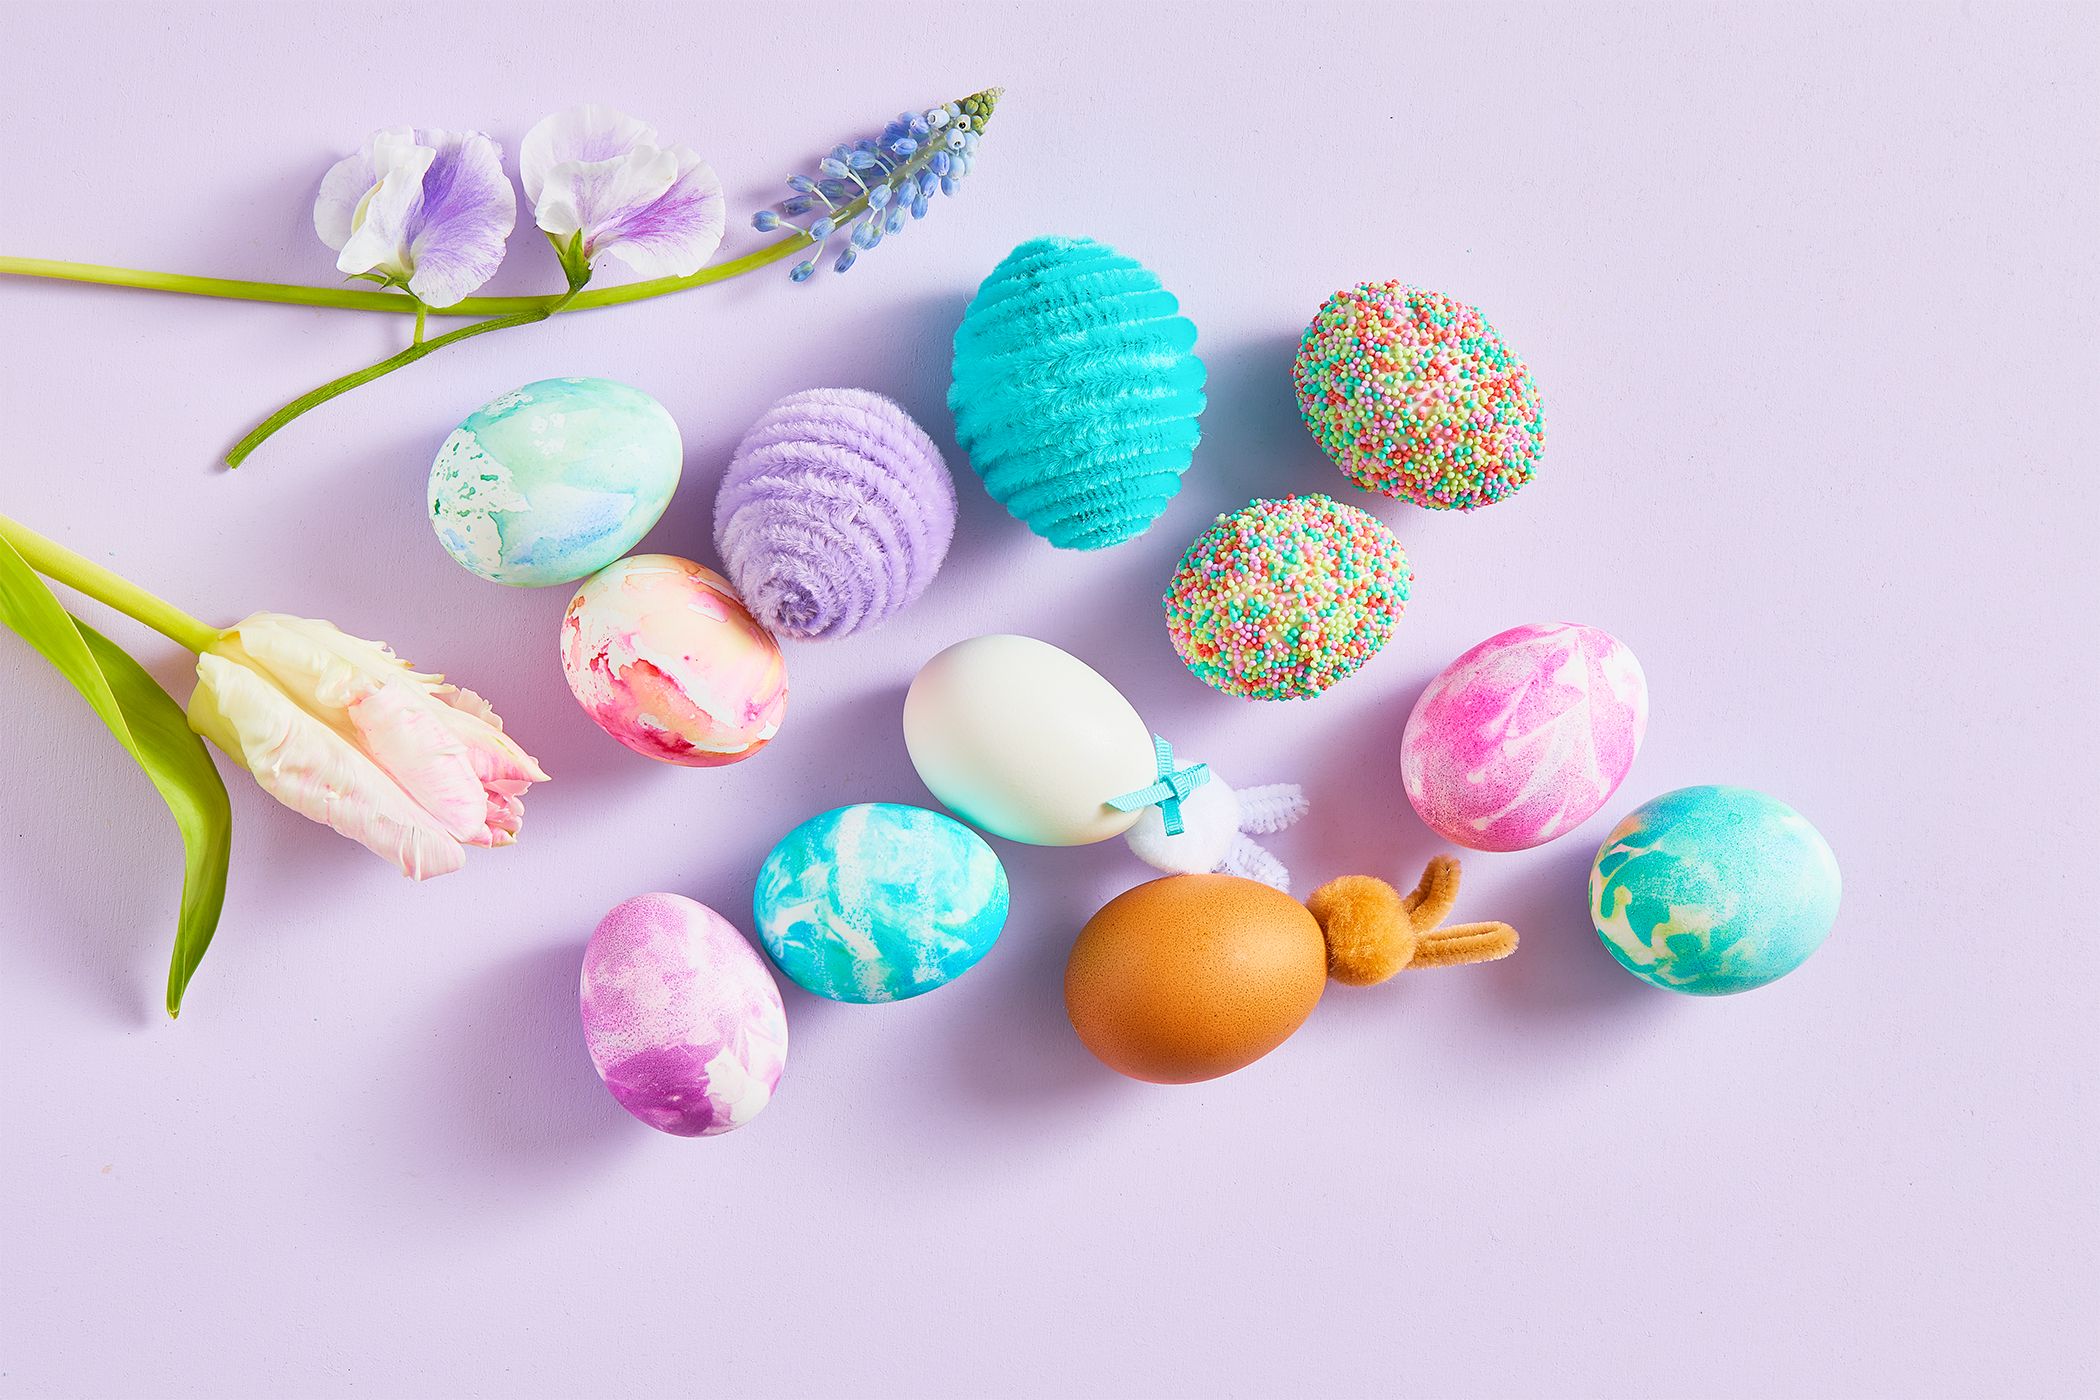 100+ Best Easter Ideas 2023 - Easter Egg Designs, Recipes & Decorating Ideas